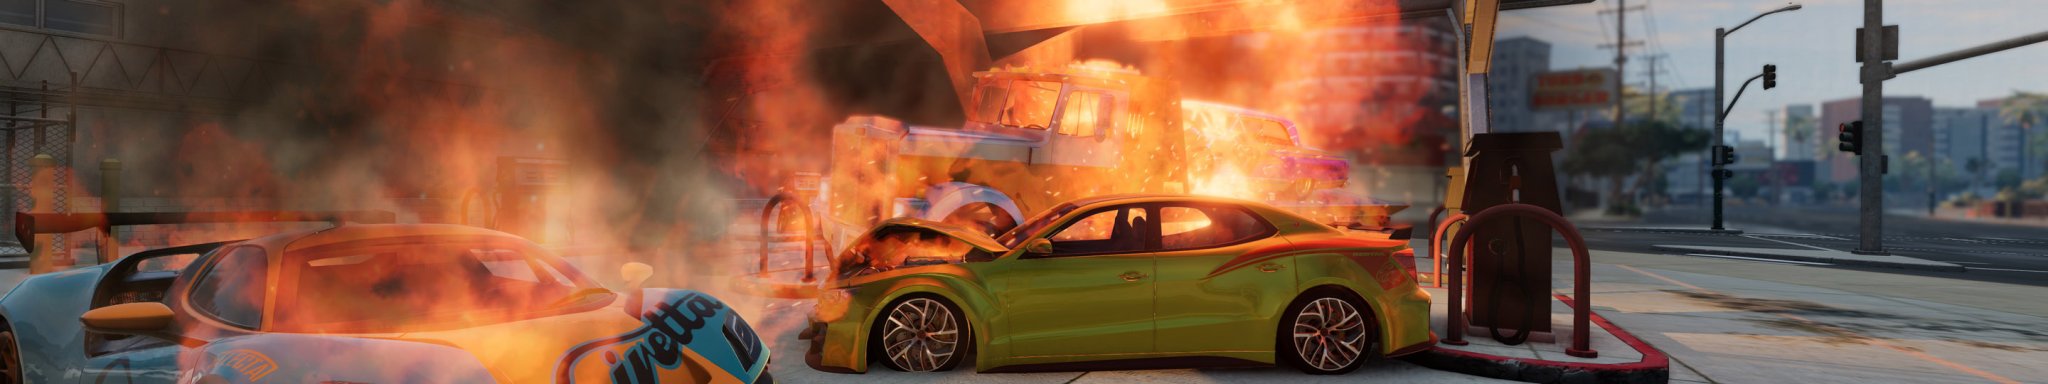 1 BeamNG Multiple VEHICLE Gas Station FIRE EXPLOSION copy.jpg